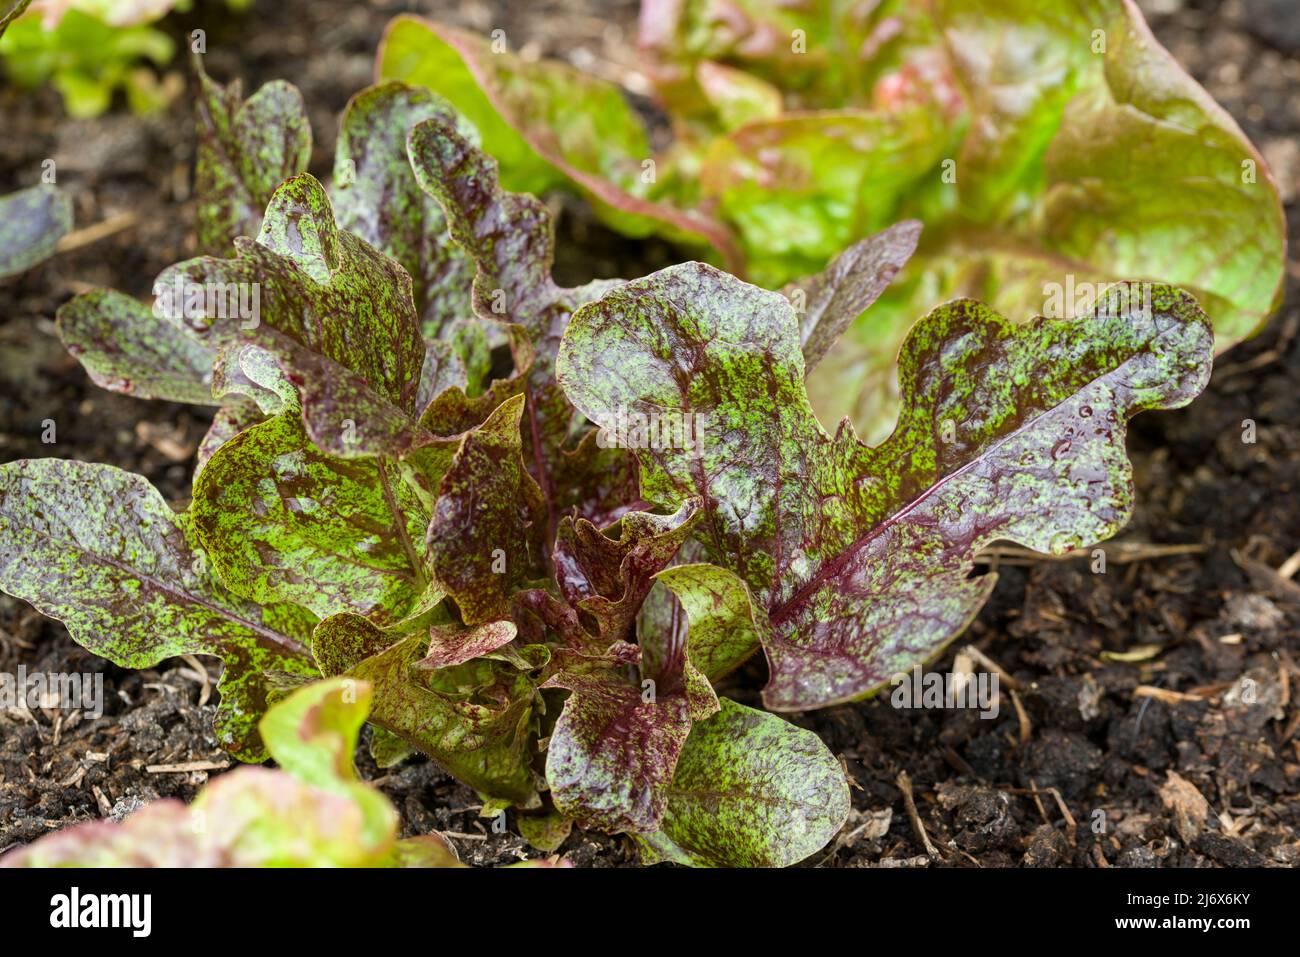 A young Fine Speckled Oak lettuce plant growing in a no-dig style vegetable garden in spring. Stock Photo